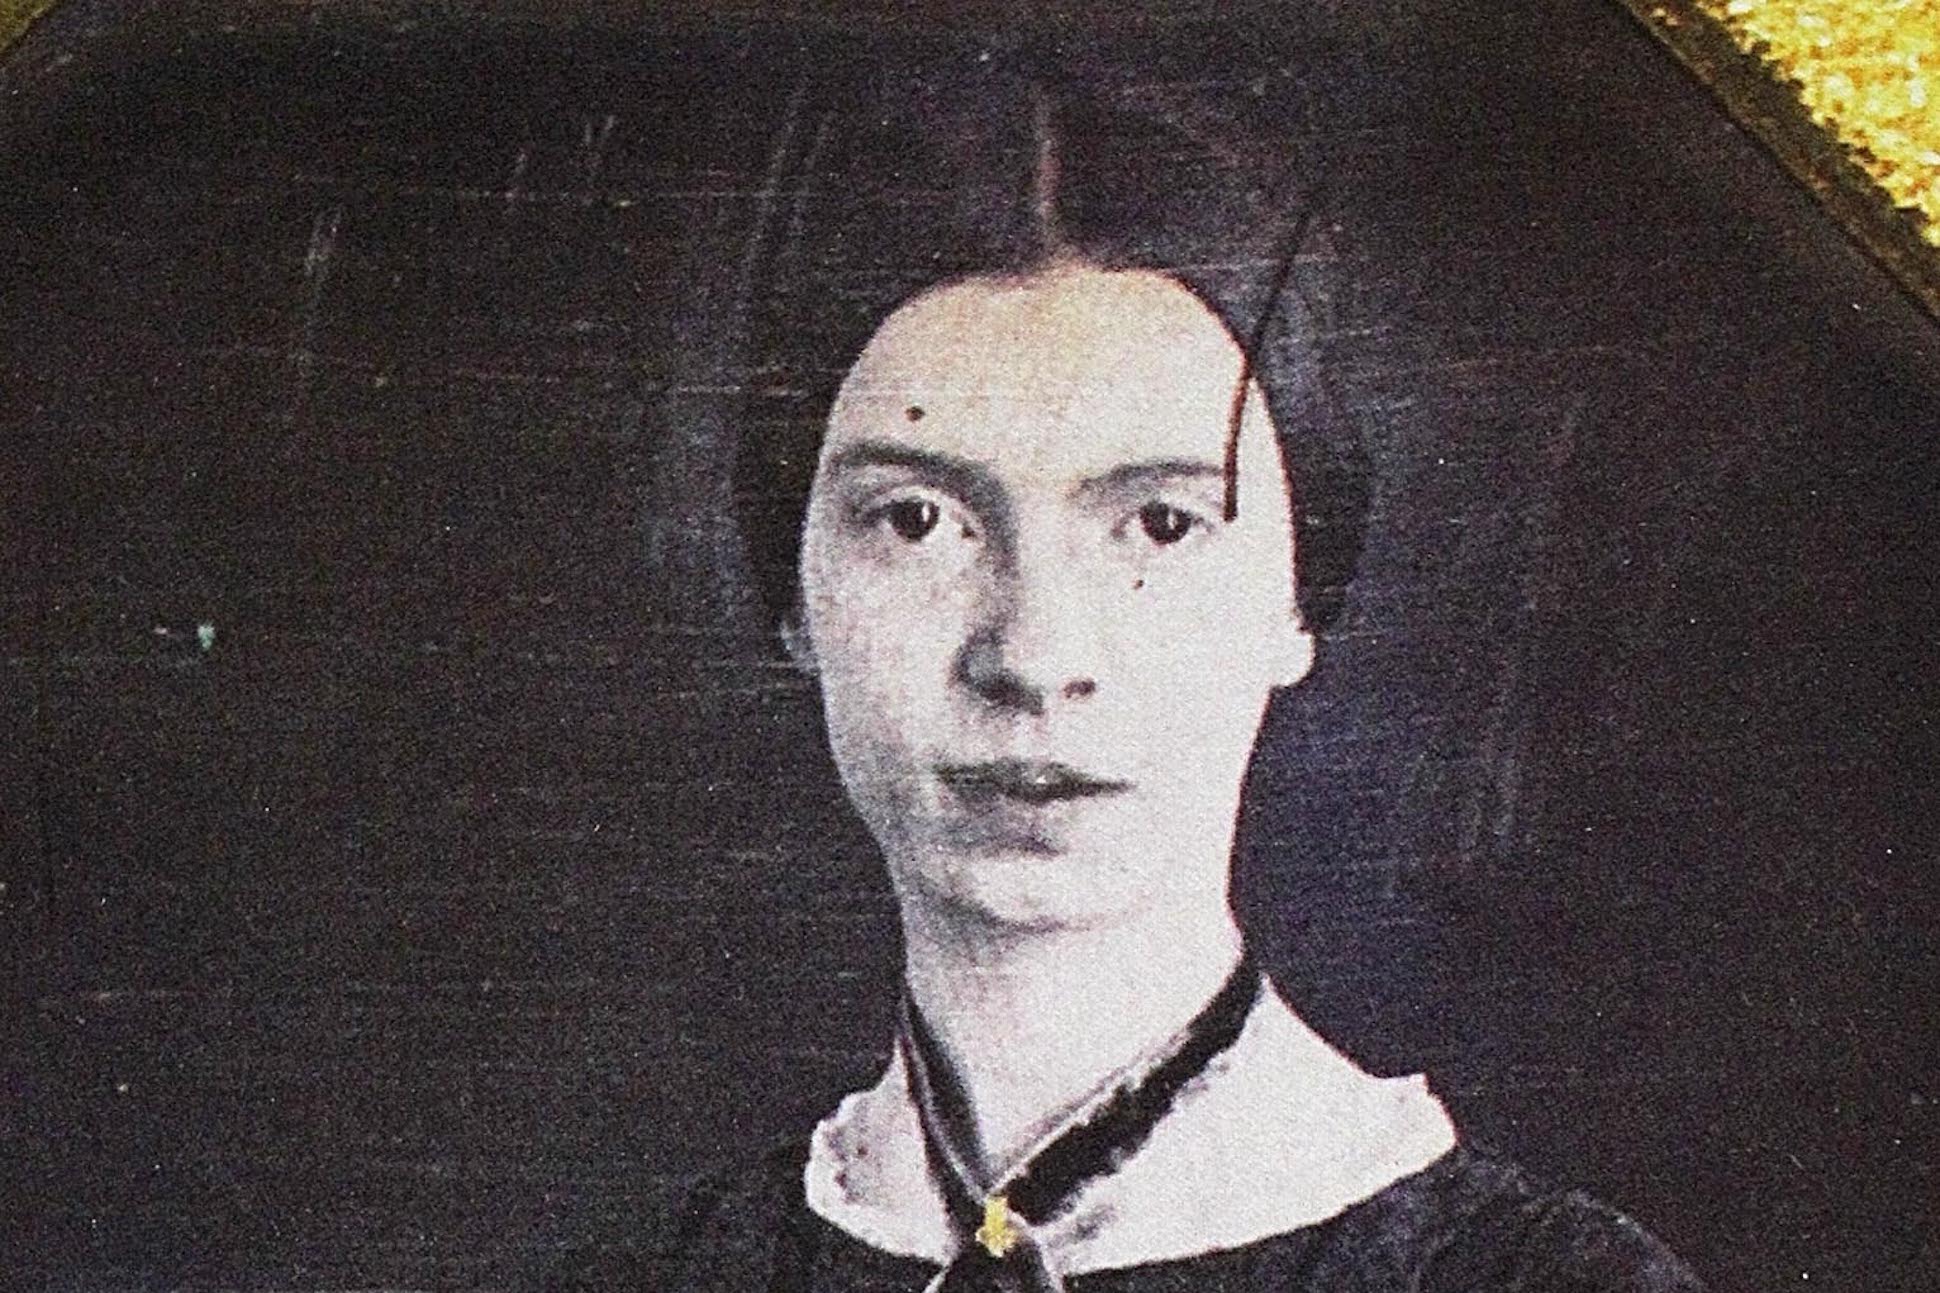 Emily Dickinson image courtesy Amherst College Archives & Special Collections. 